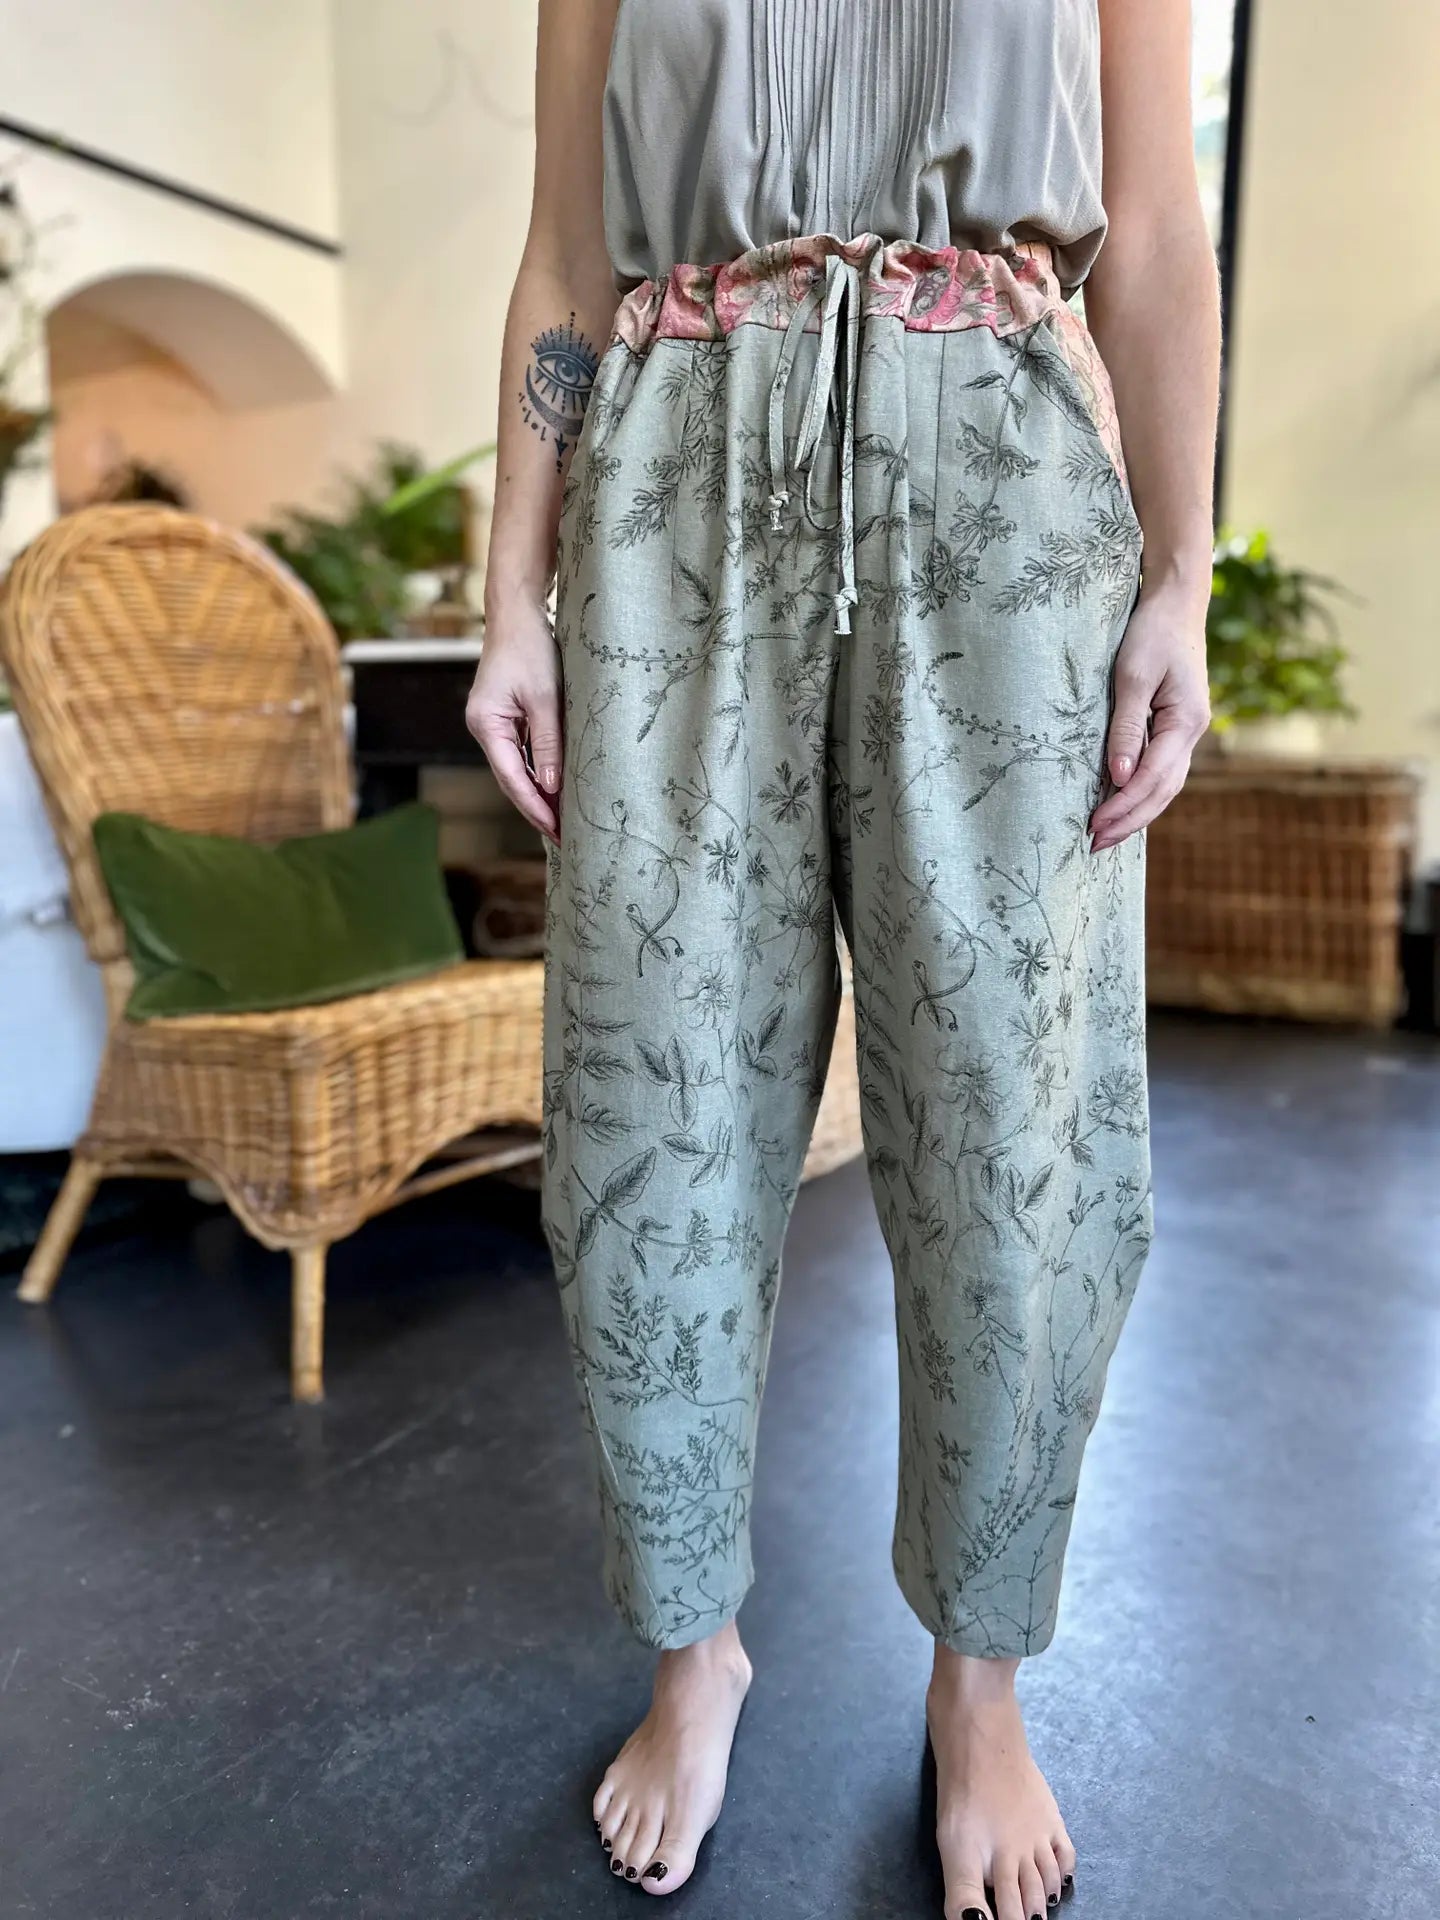 Market of Stars Map of My Heart Printed Boho Artist Pants in Sage front view with drawstring  - Style Society Marketplace